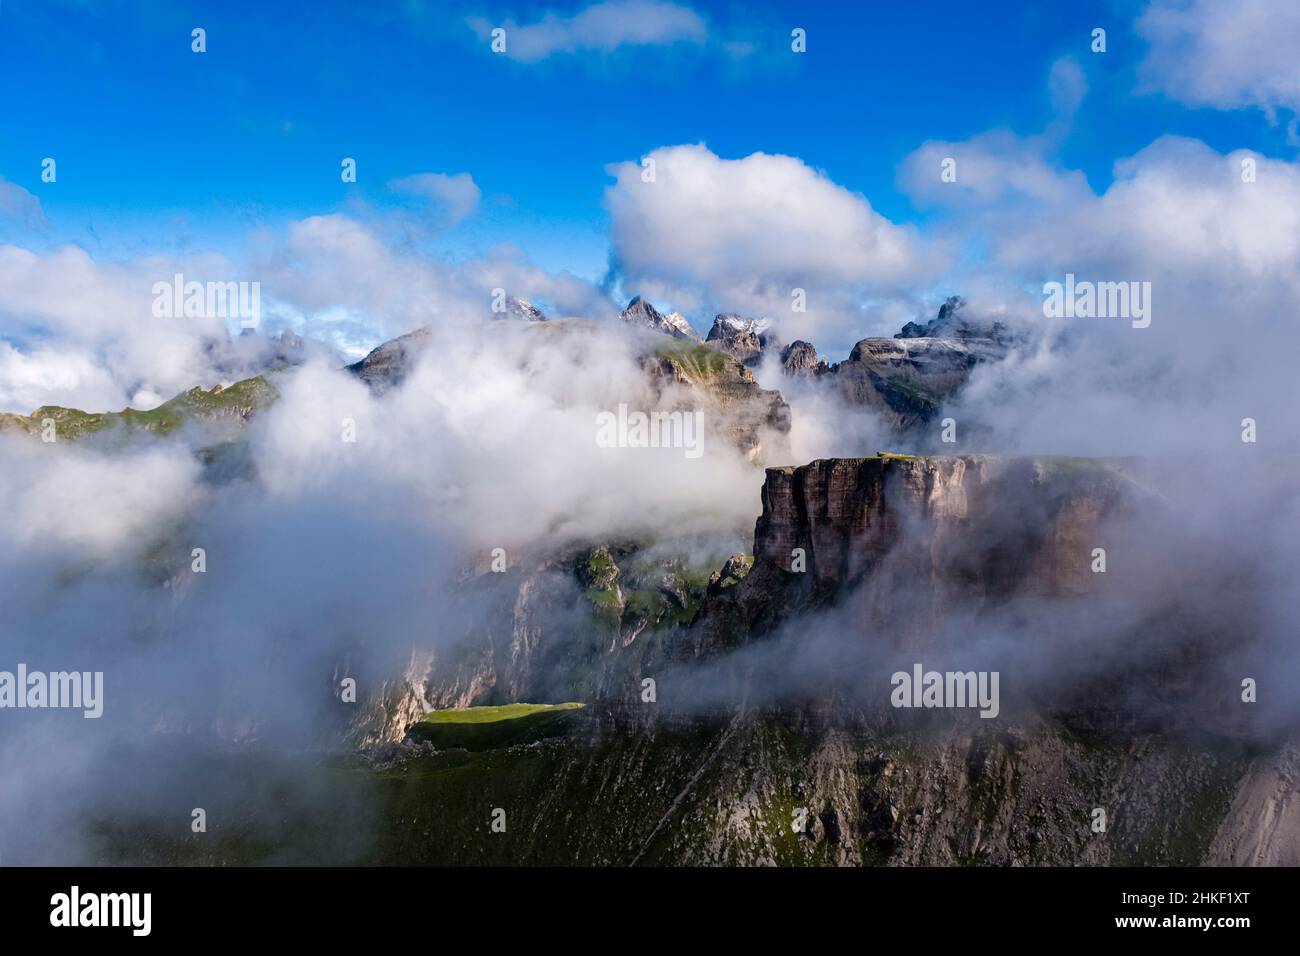 Rock faces of Puez group, covered in clouds, seen from the summit of Grand Cir. Stock Photo